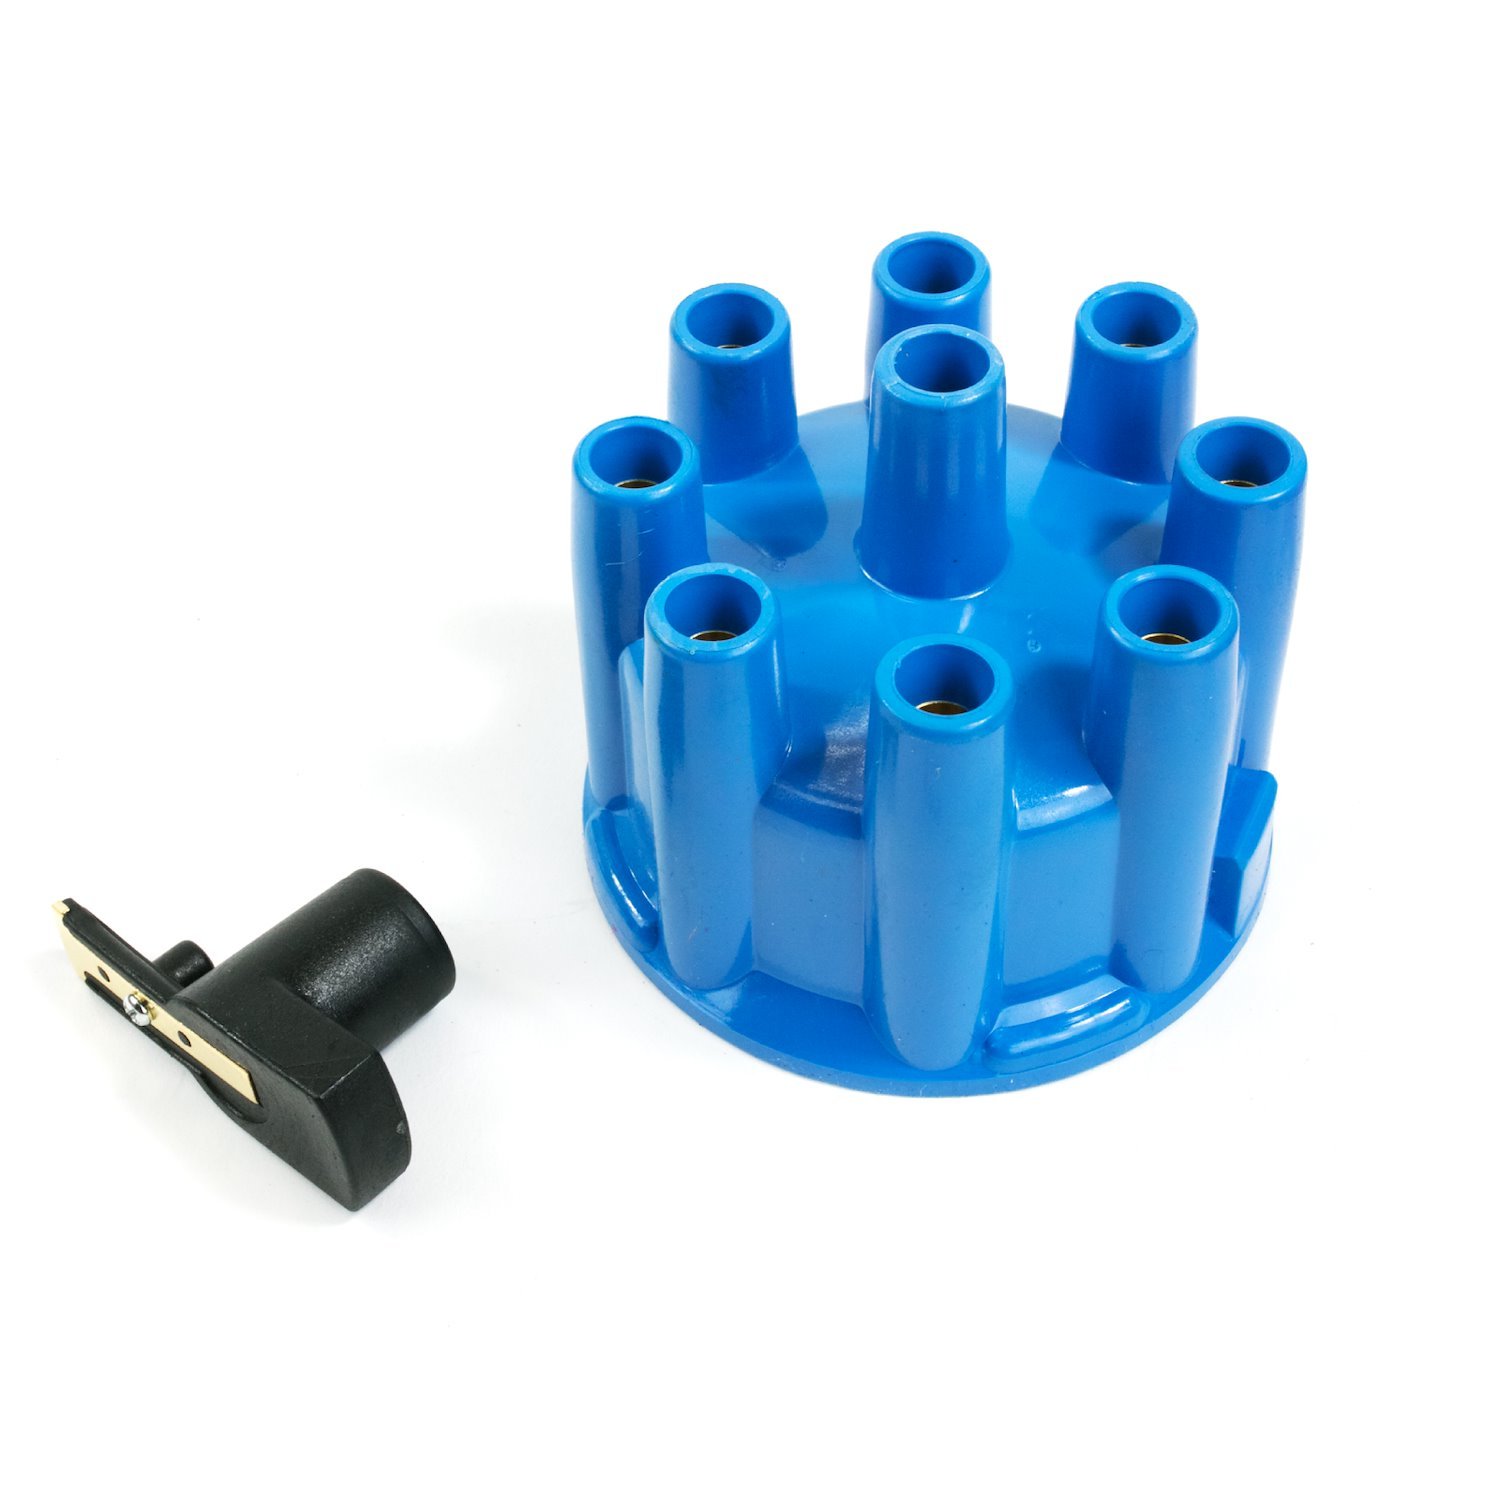 JM6972BL Pro Billet & Ready-to-Run Distributor Cap and Rotor Kit, 8 Cyl Female, Blue